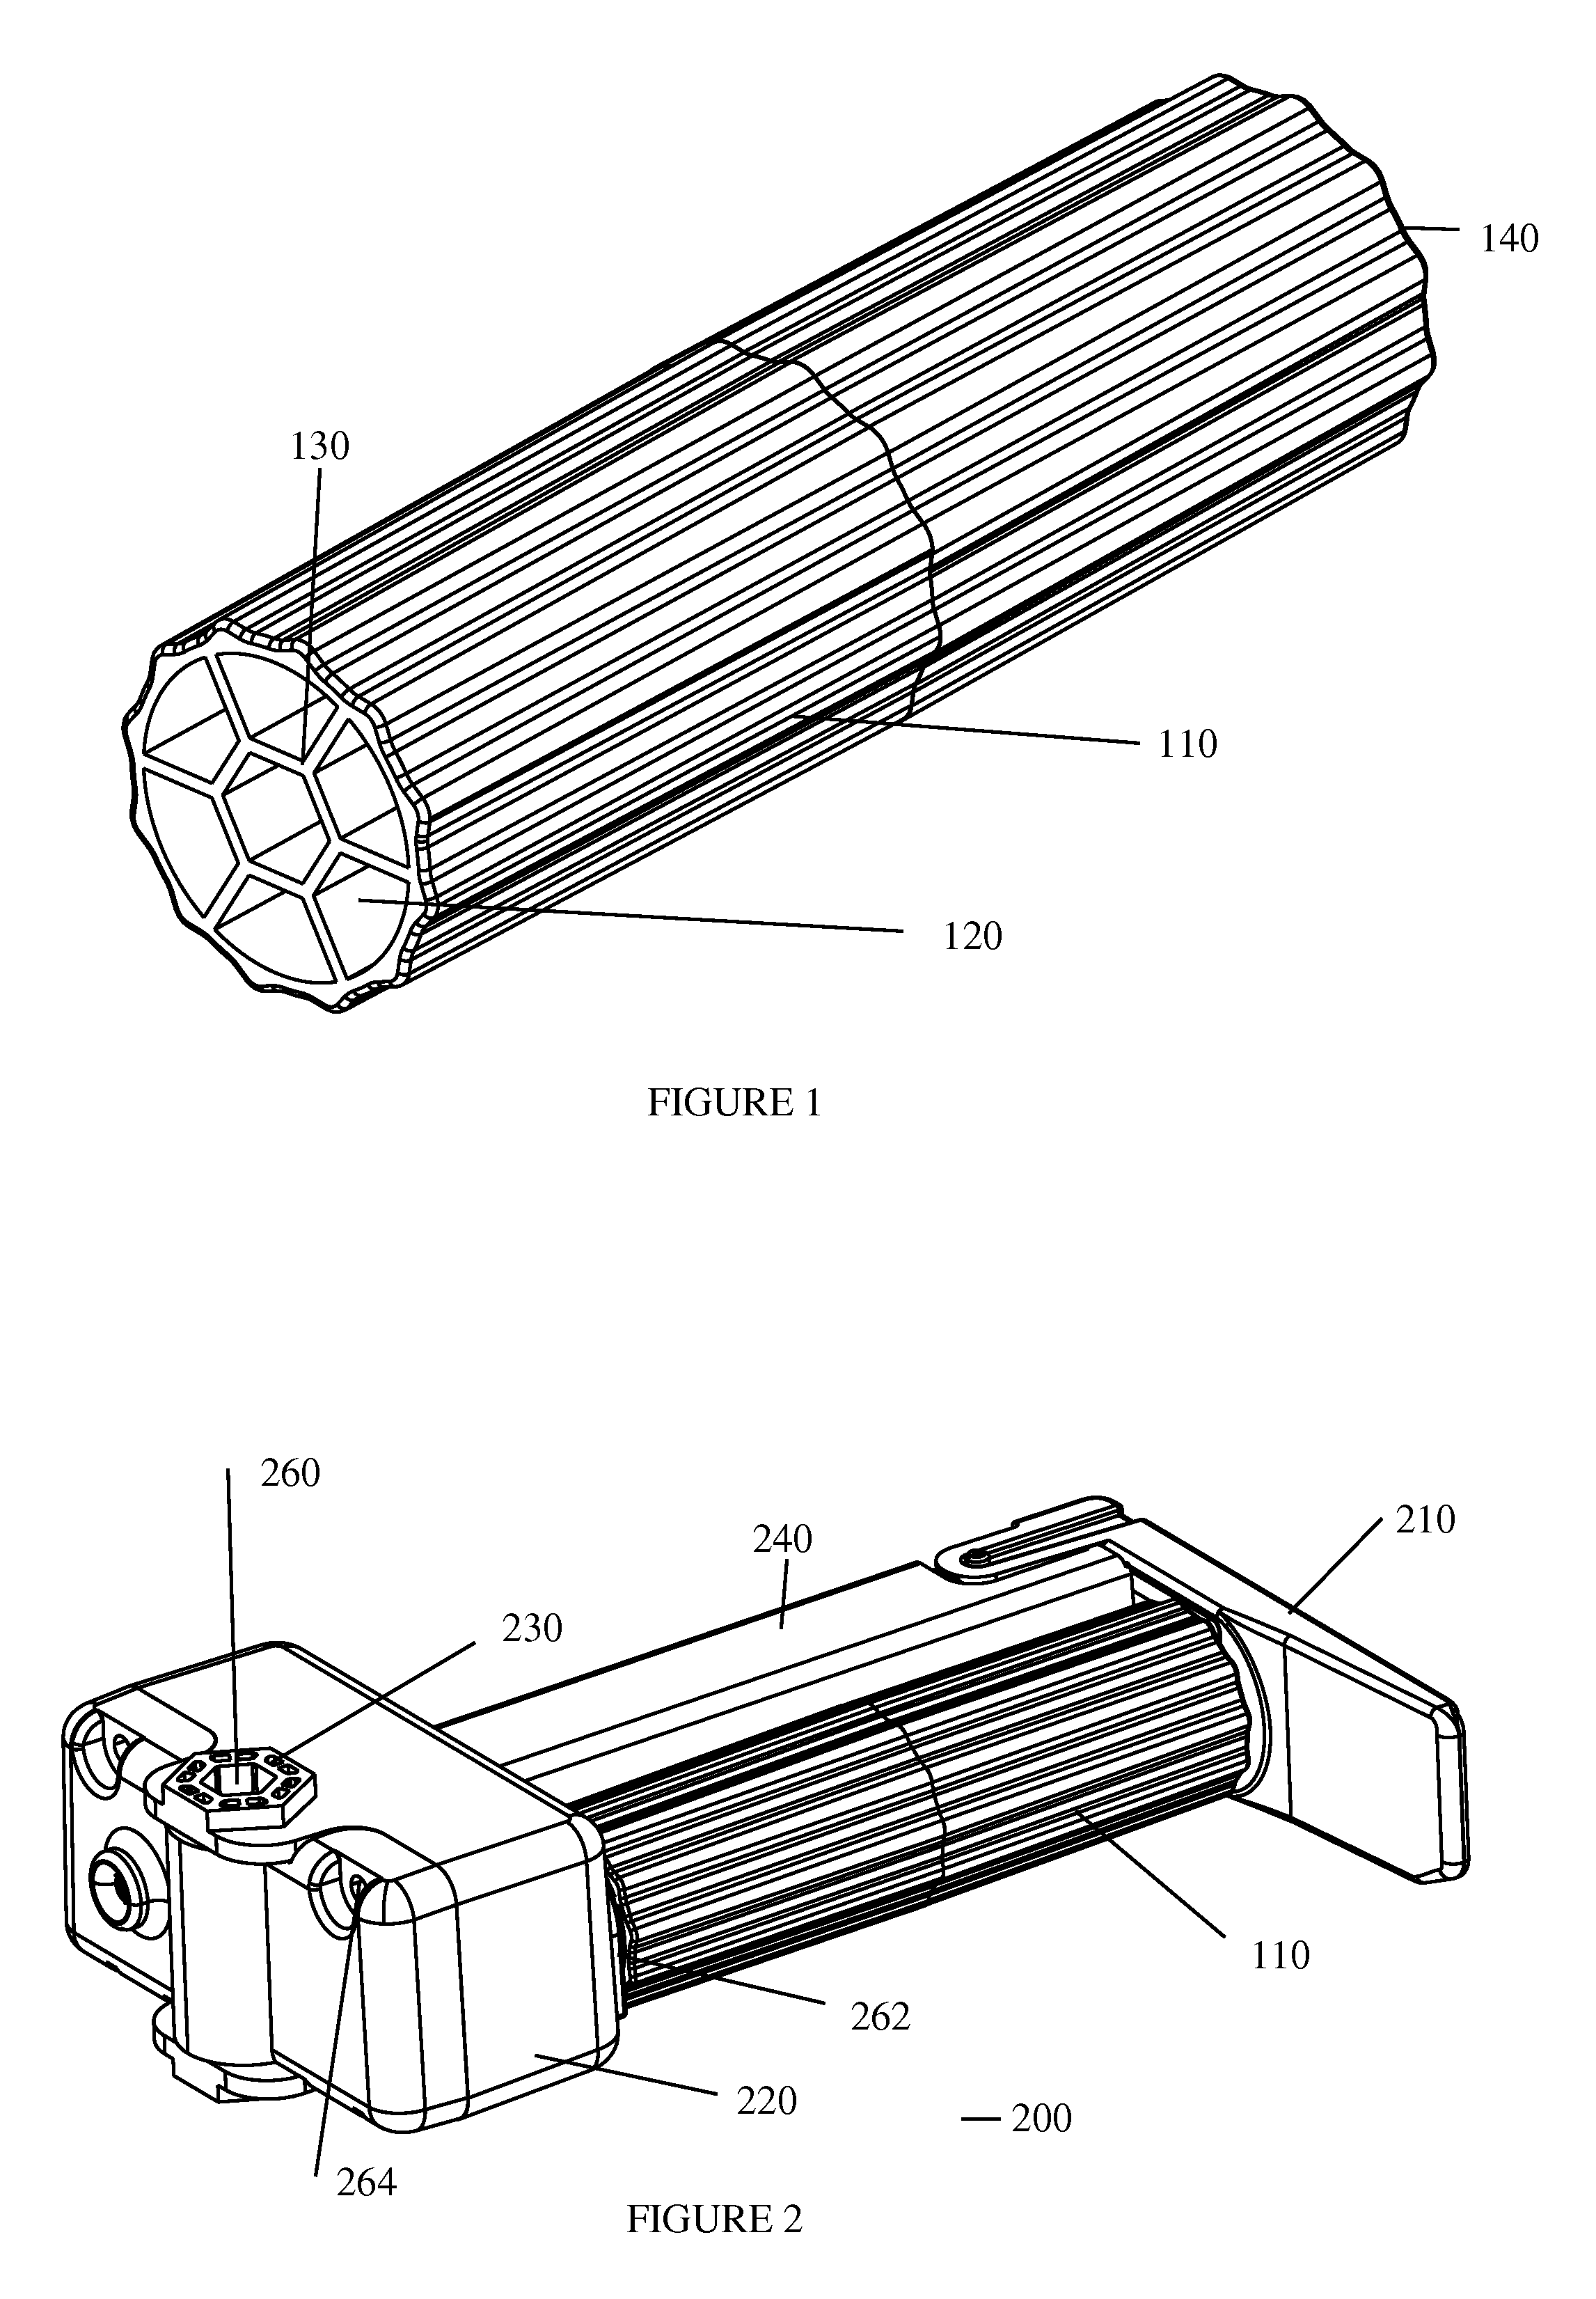 Transfer apparatus and the method of using the same in a food preparation appliance